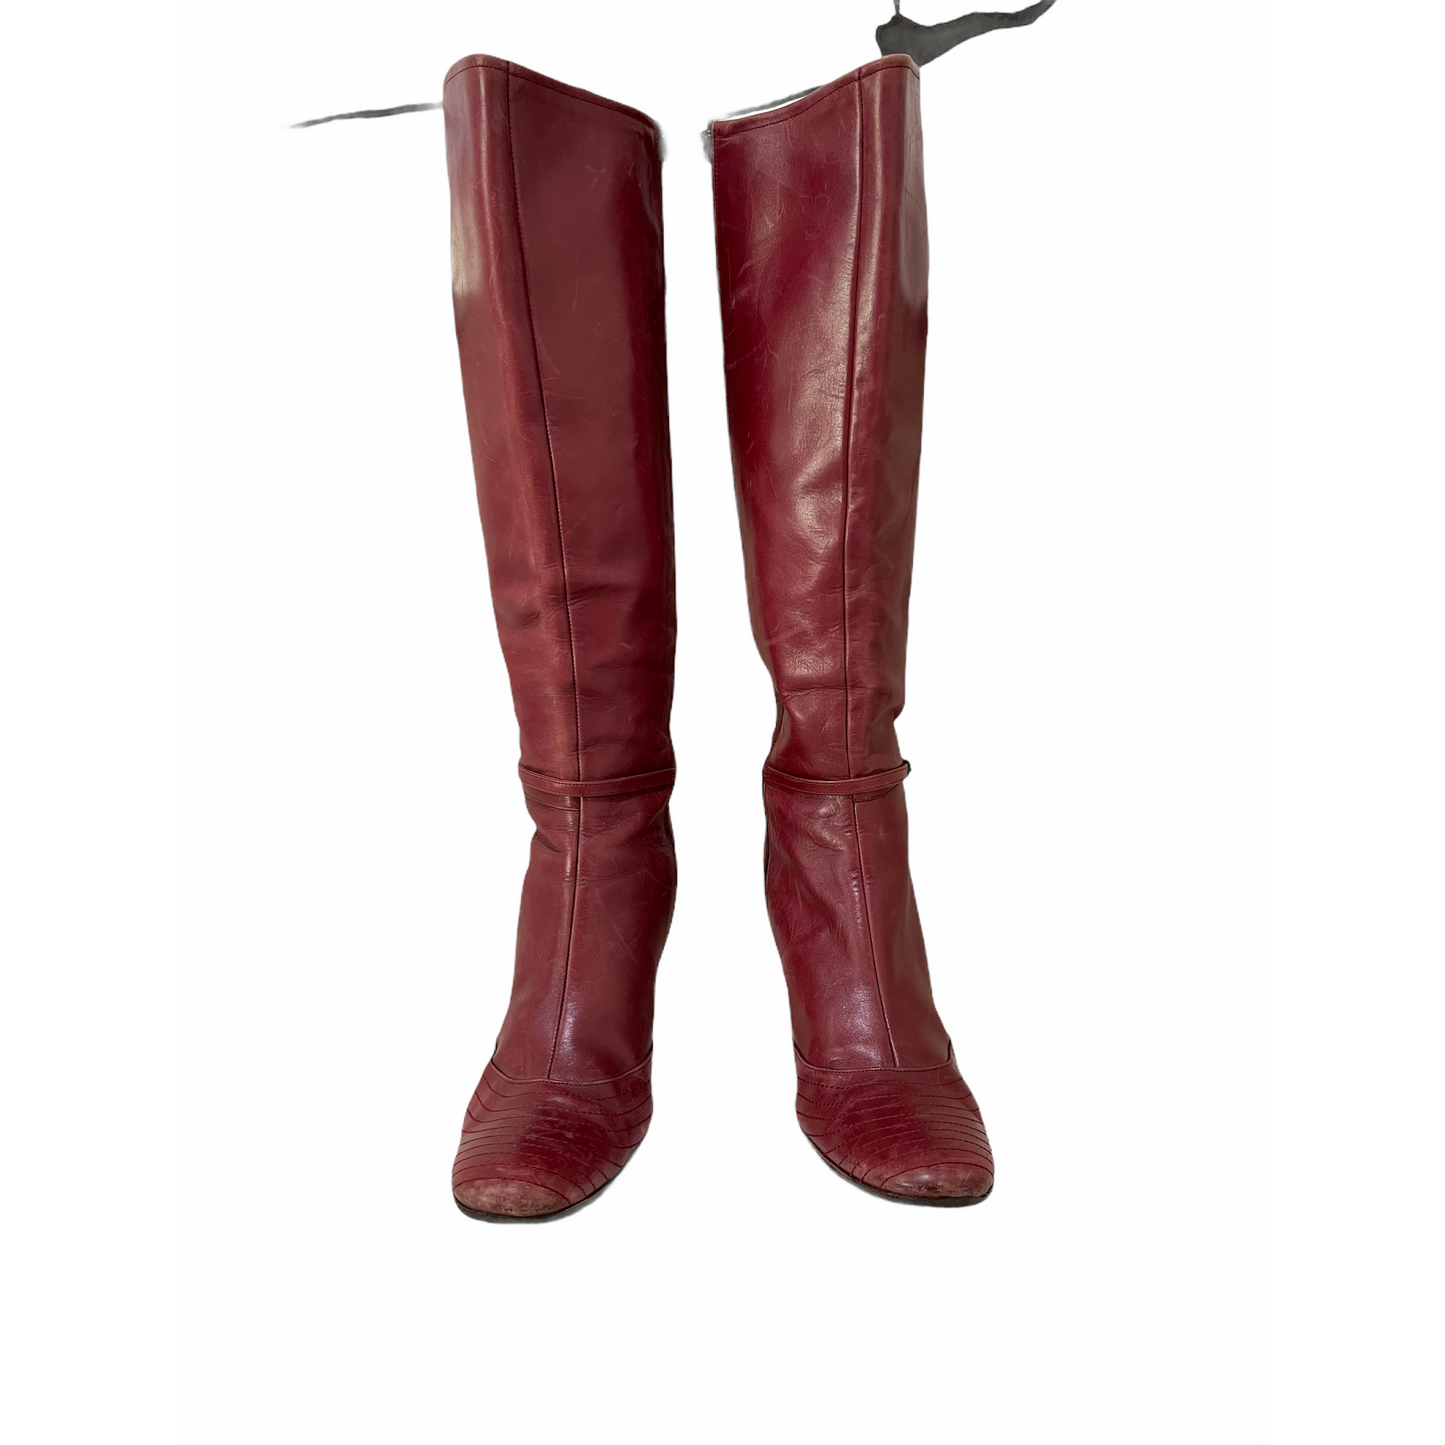 Heeled Boots-Knee High-Red Leather